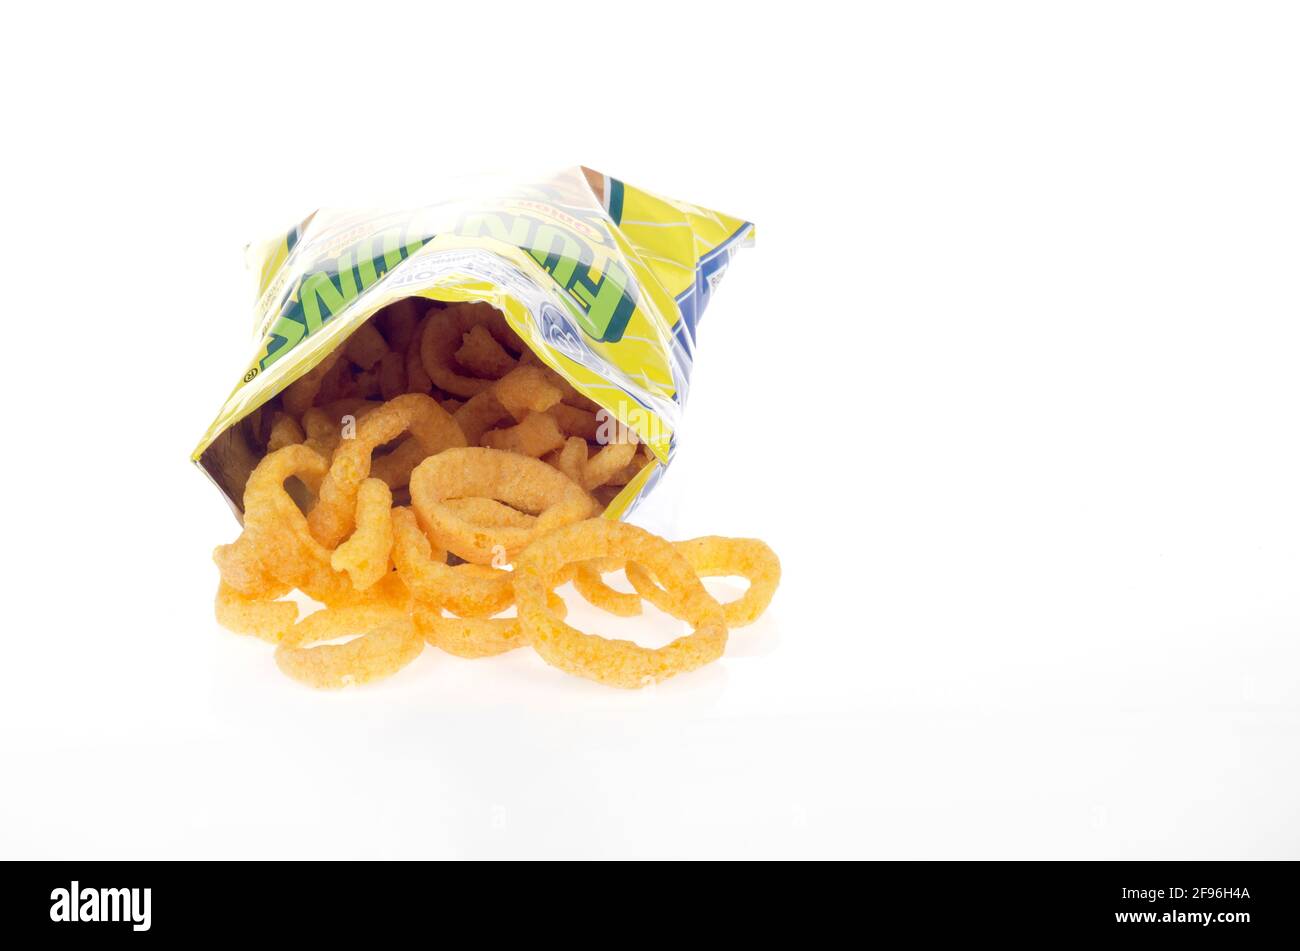 Funyuns Onion Flavored Rings Snack Bag von Frito-Lay Company isoliert Auf Weiß Stockfoto